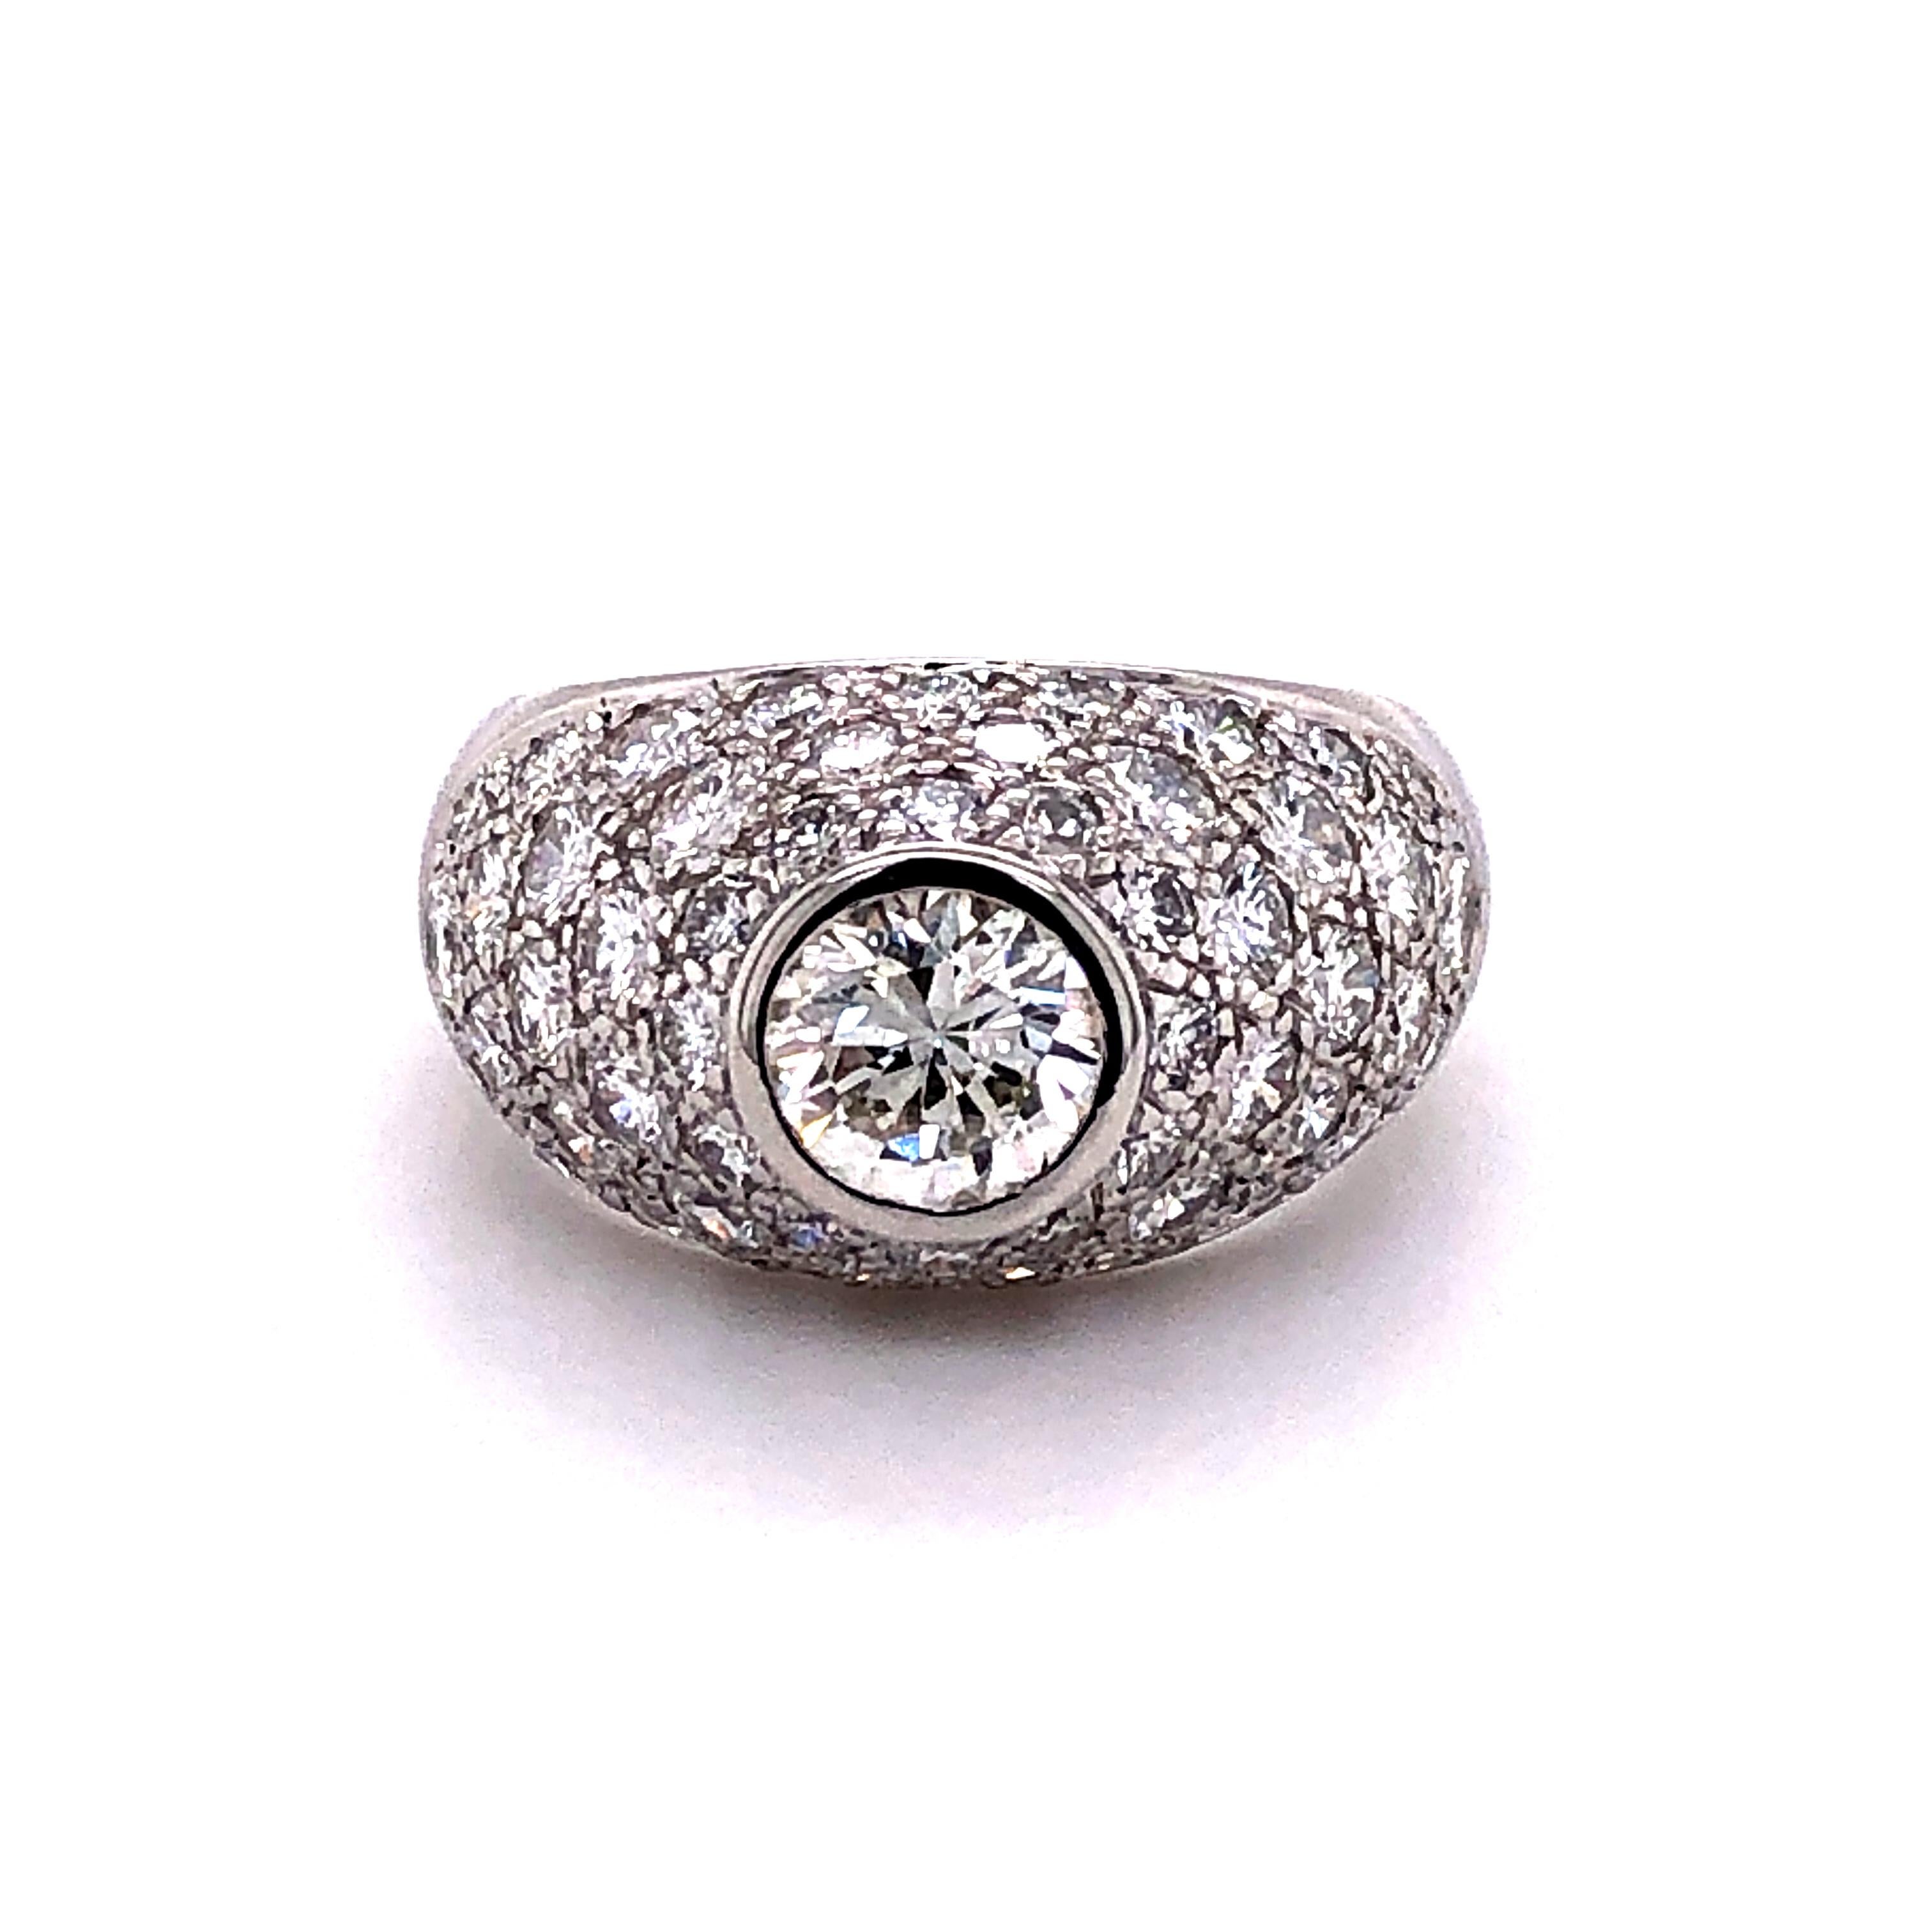 On top of this dome shaped 18 karat white gold ring sits a sparkling 0.92 carats brilliant cut diamond of H color and vs2 clarity. Beautifully pave set mounting with 54 brilliant cut diamonds of G/H color and vs clarity, total weight 2.20 carats.